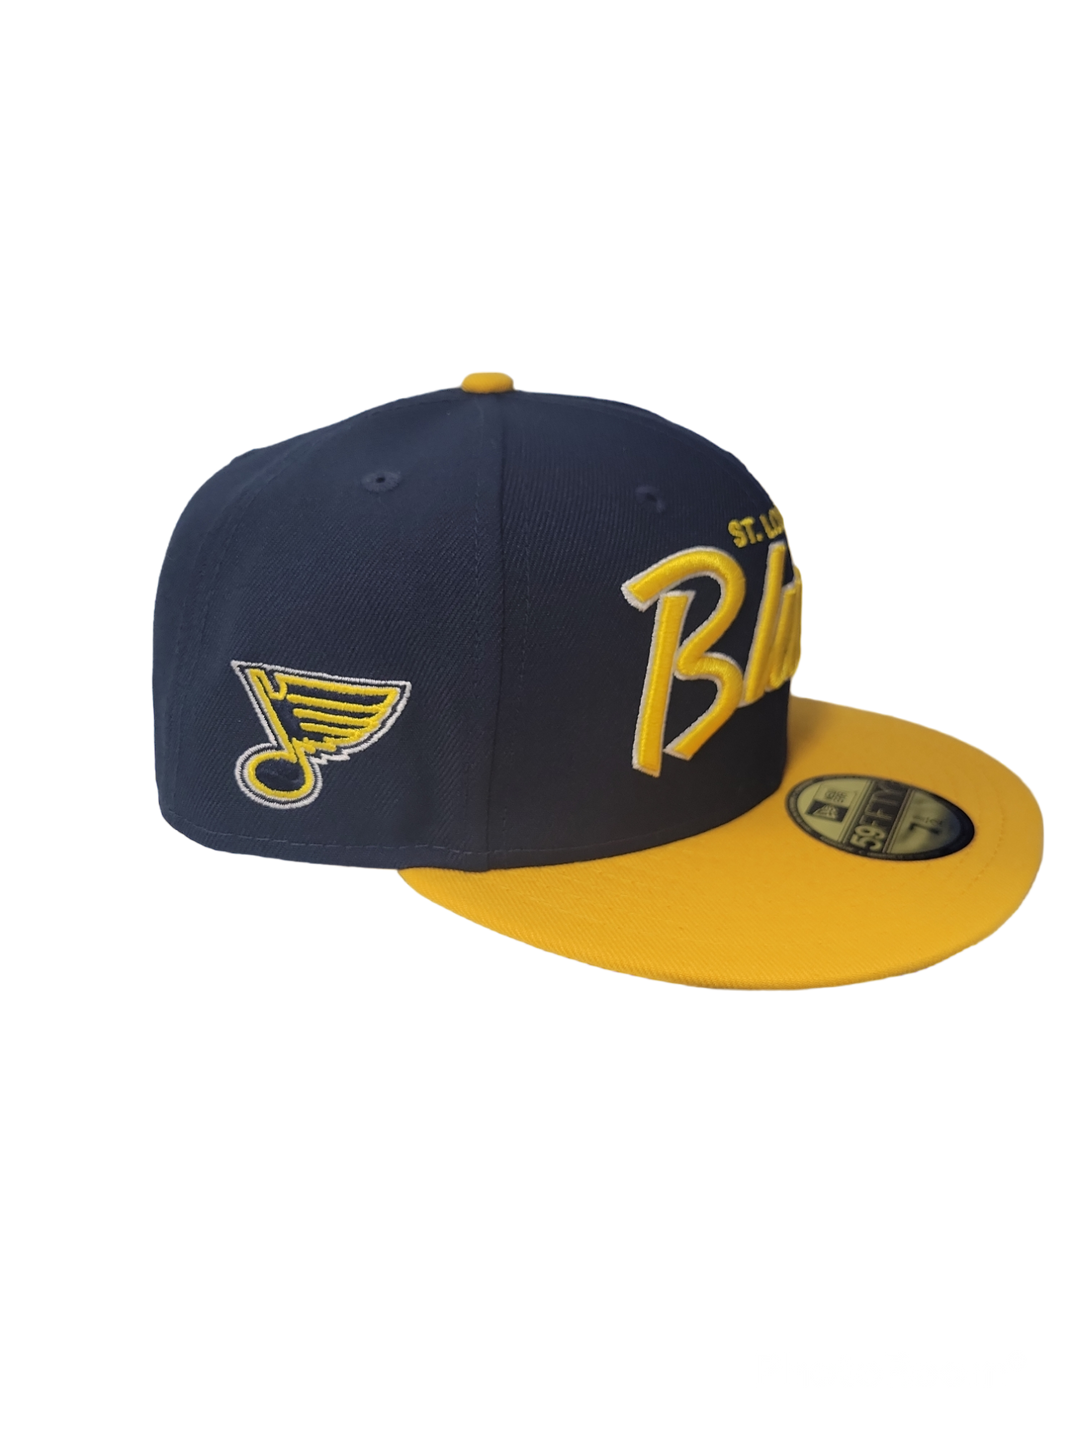 ST. LOUIS BLUES NEW ERA 5950 HERITAGE SCRIPT NAVY AND GOLD FITTED HAT – STL  Authentics